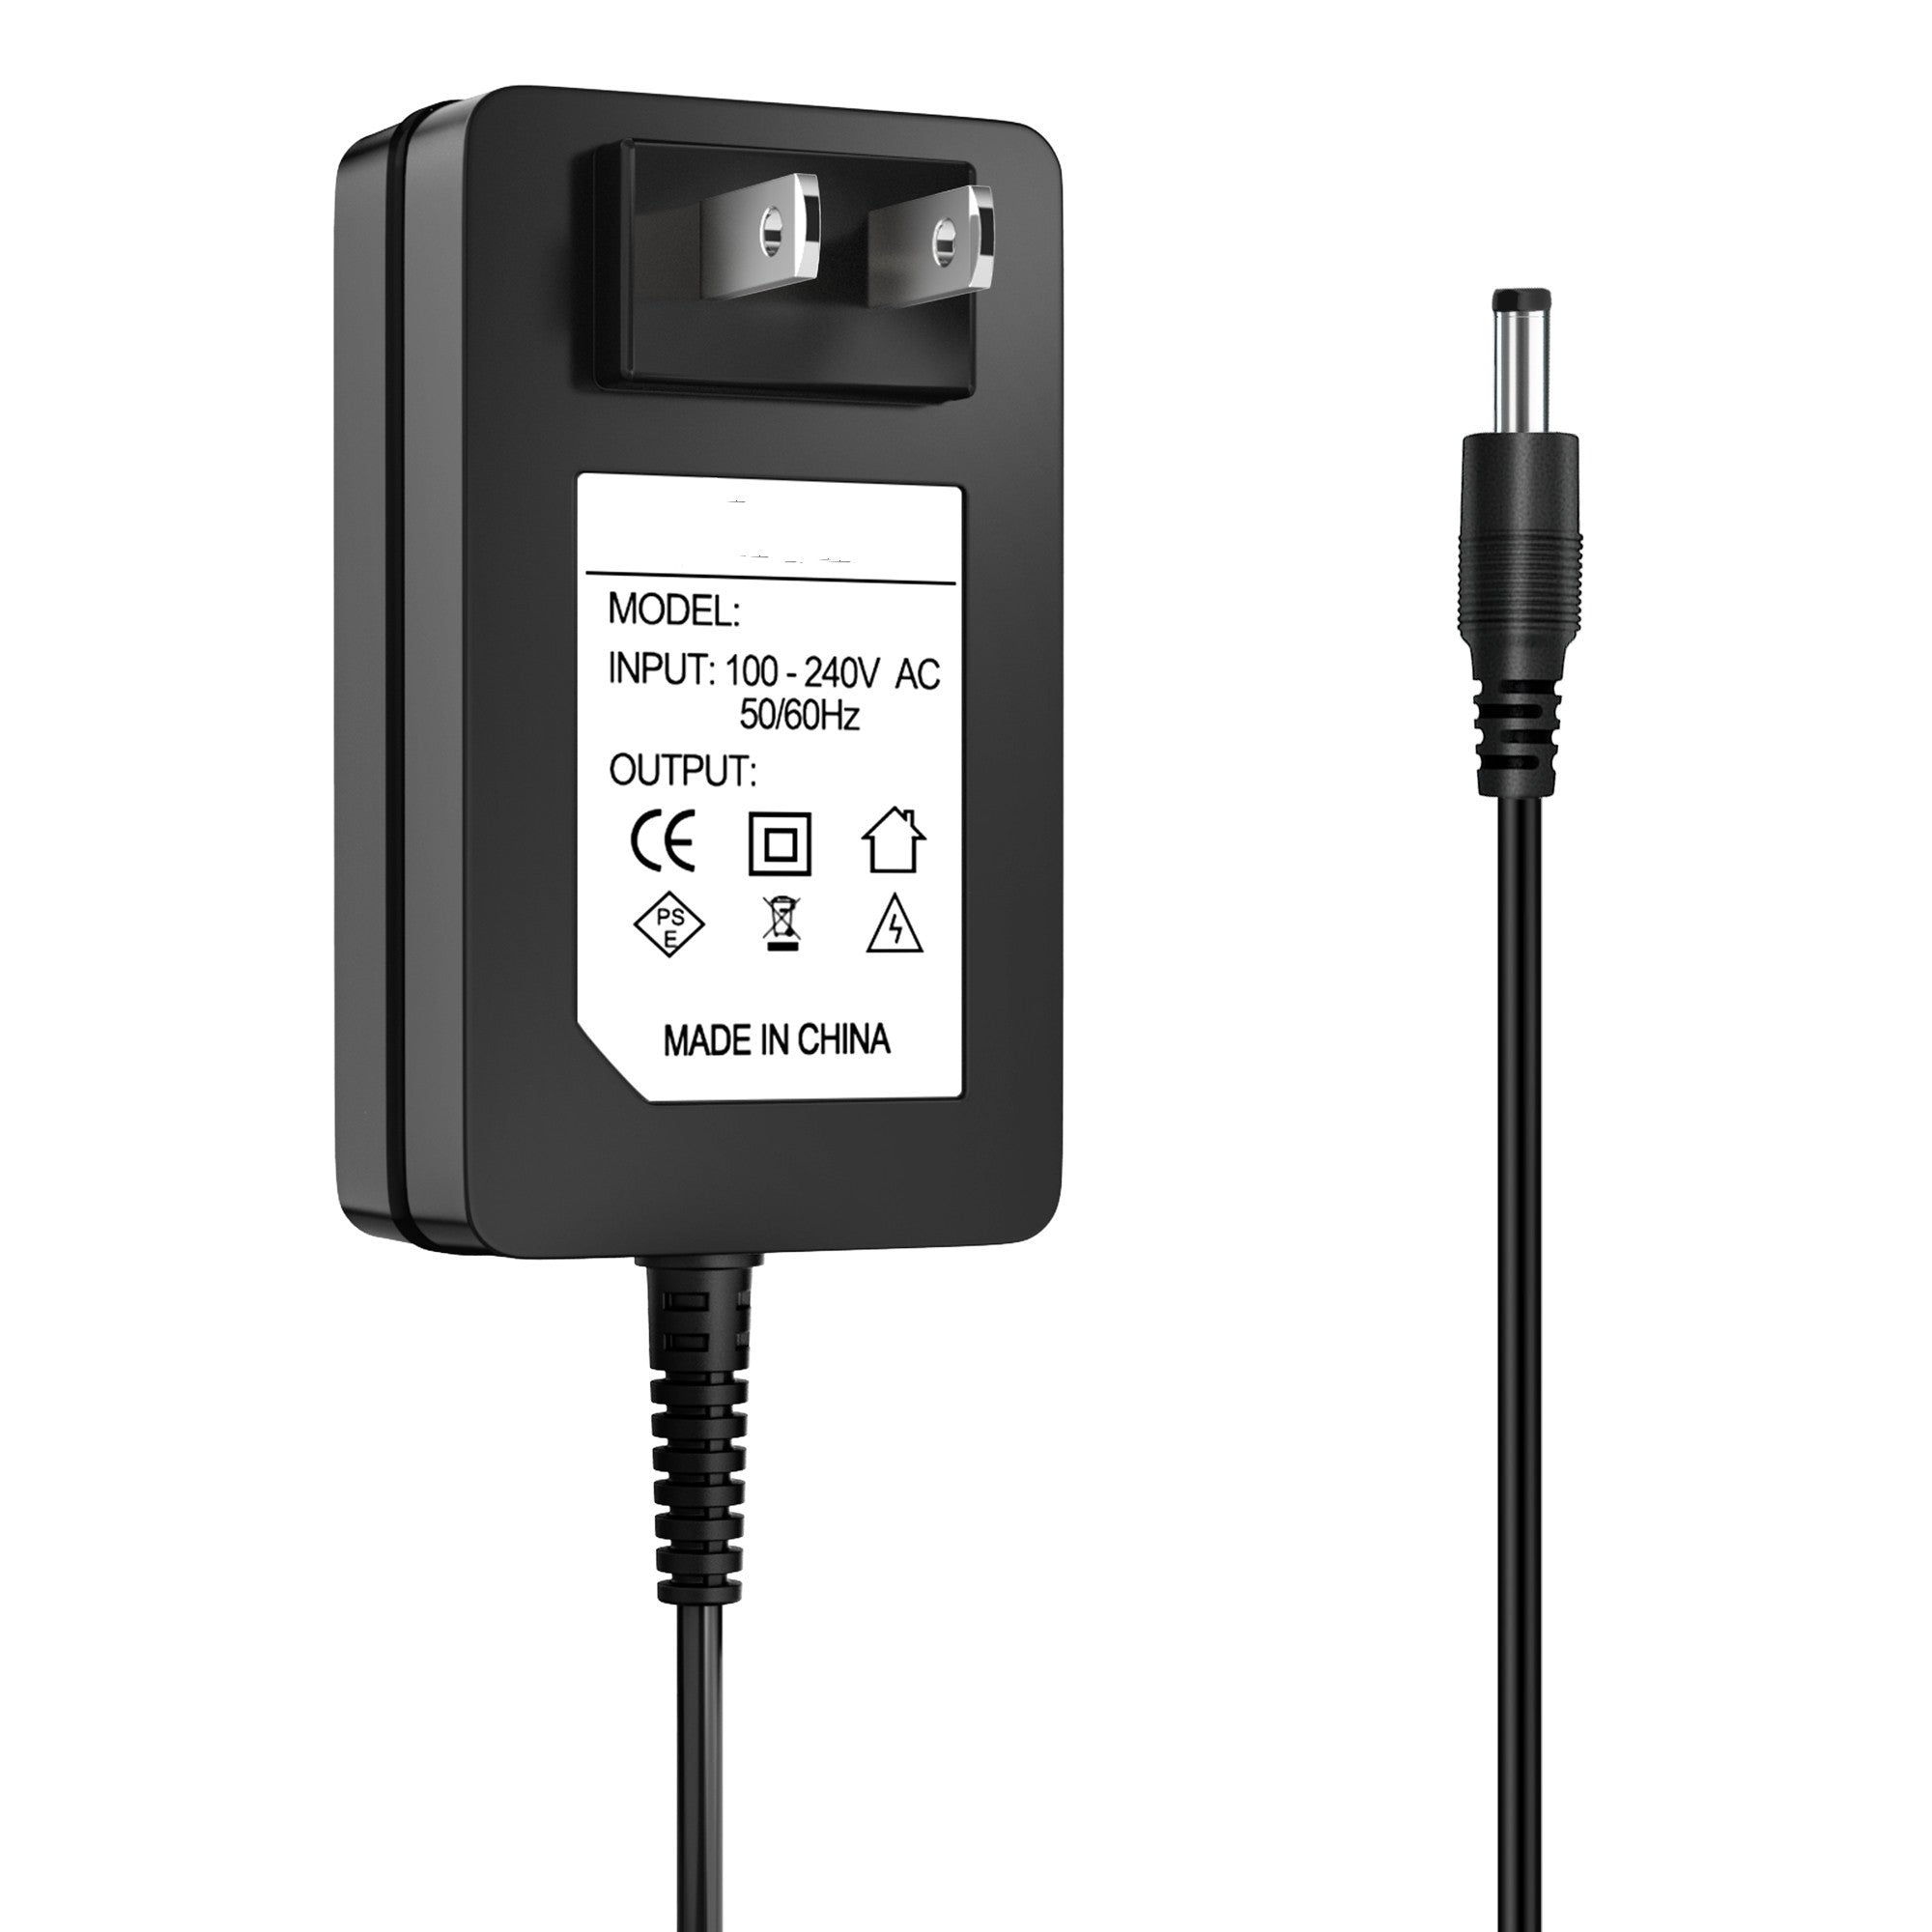 AbleGrid AC/DC Adapter Compatible with Canon imageformula DR-C225 DR-C225W Power Supply Cord Charger